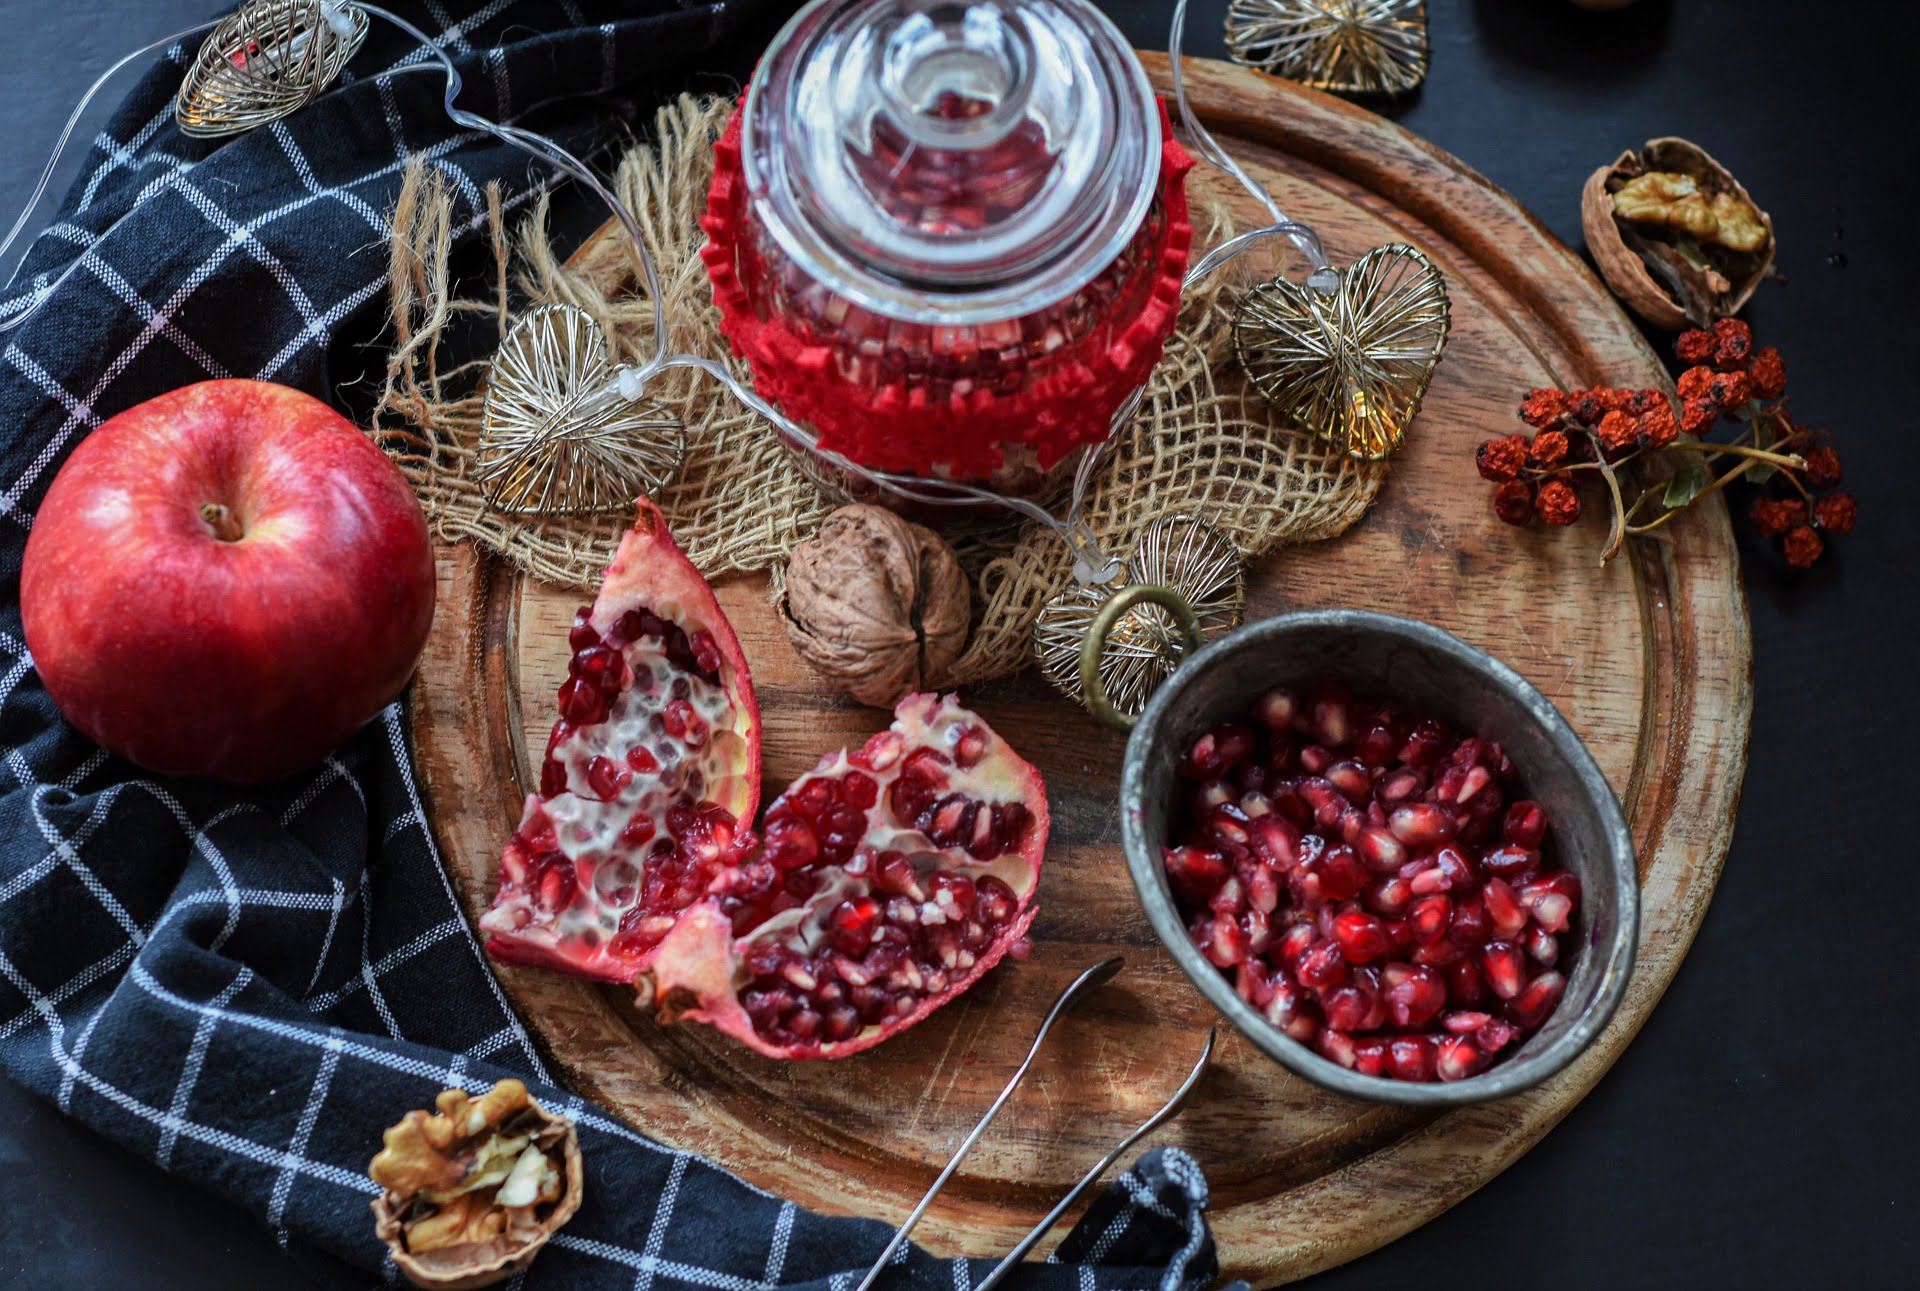 Pomegranate New Year Tradition